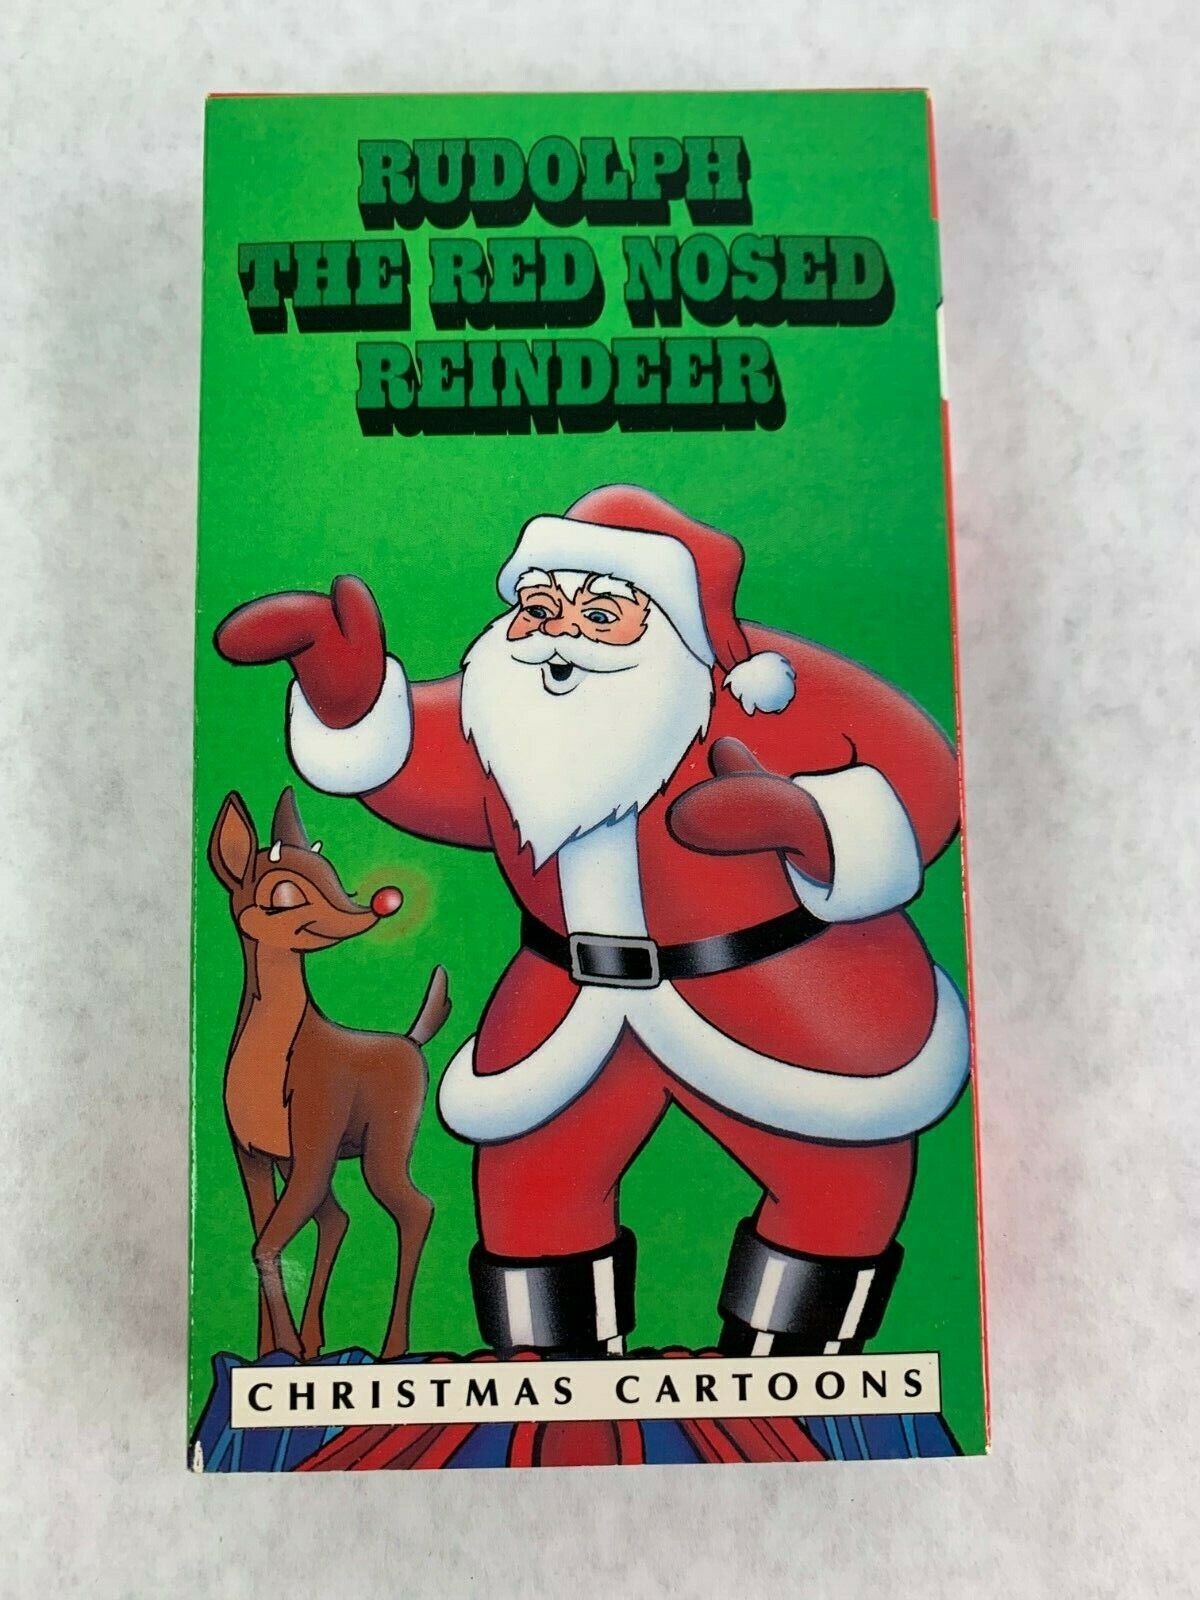 Vintage Classic Rudolph the Red Nosed Reindeer 1993 VHS Tape Movie Christmas